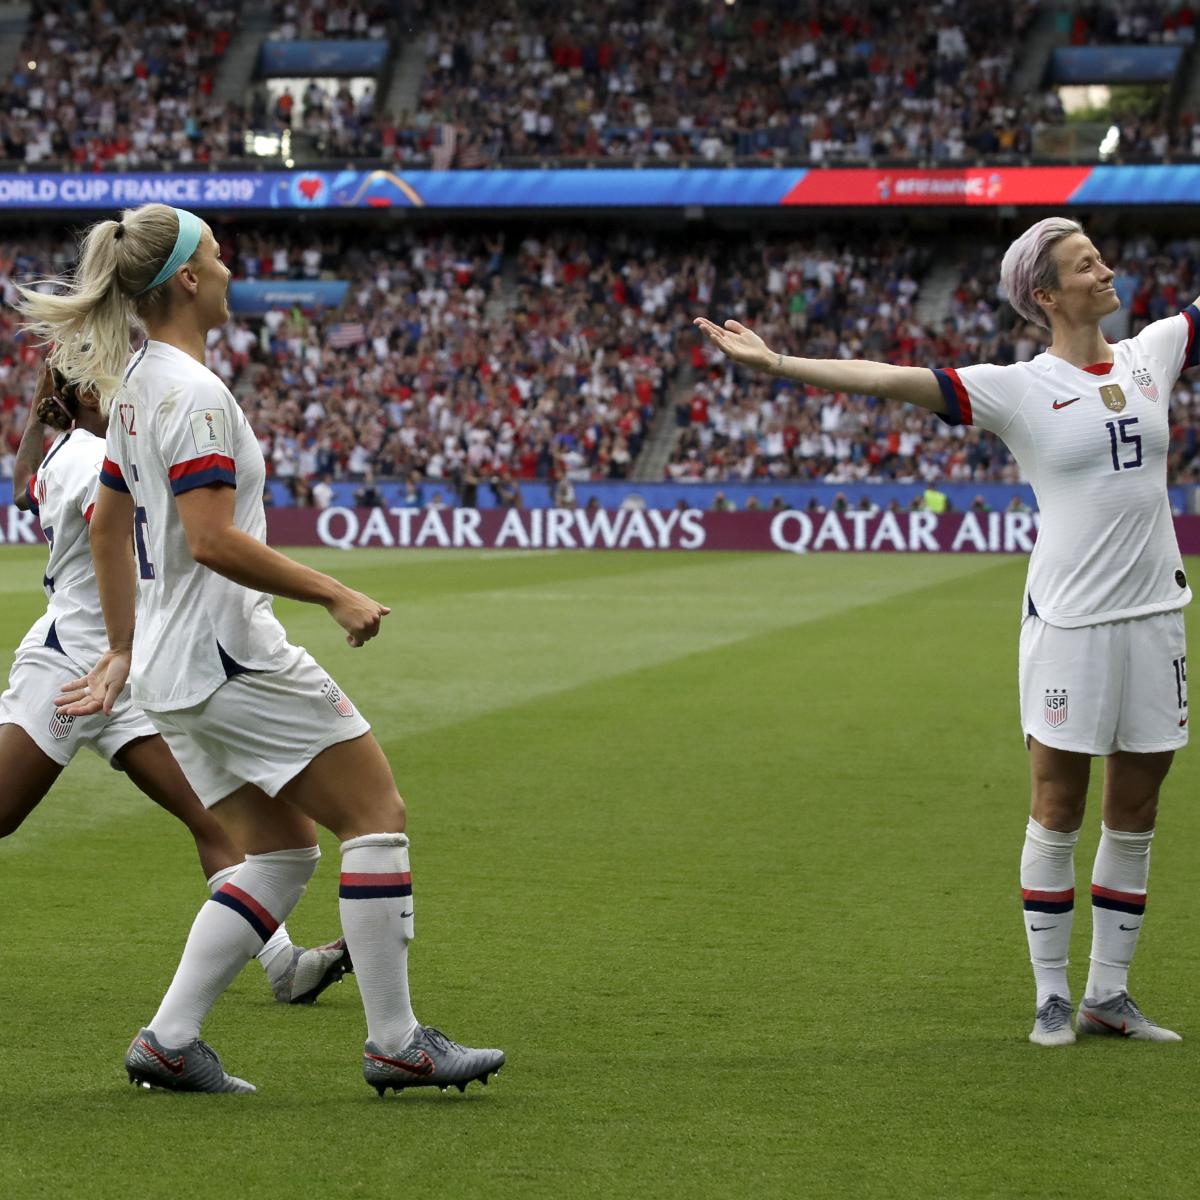 USWNT vs. England, Copa America and Gold Cup Finals, Wimbledon and More